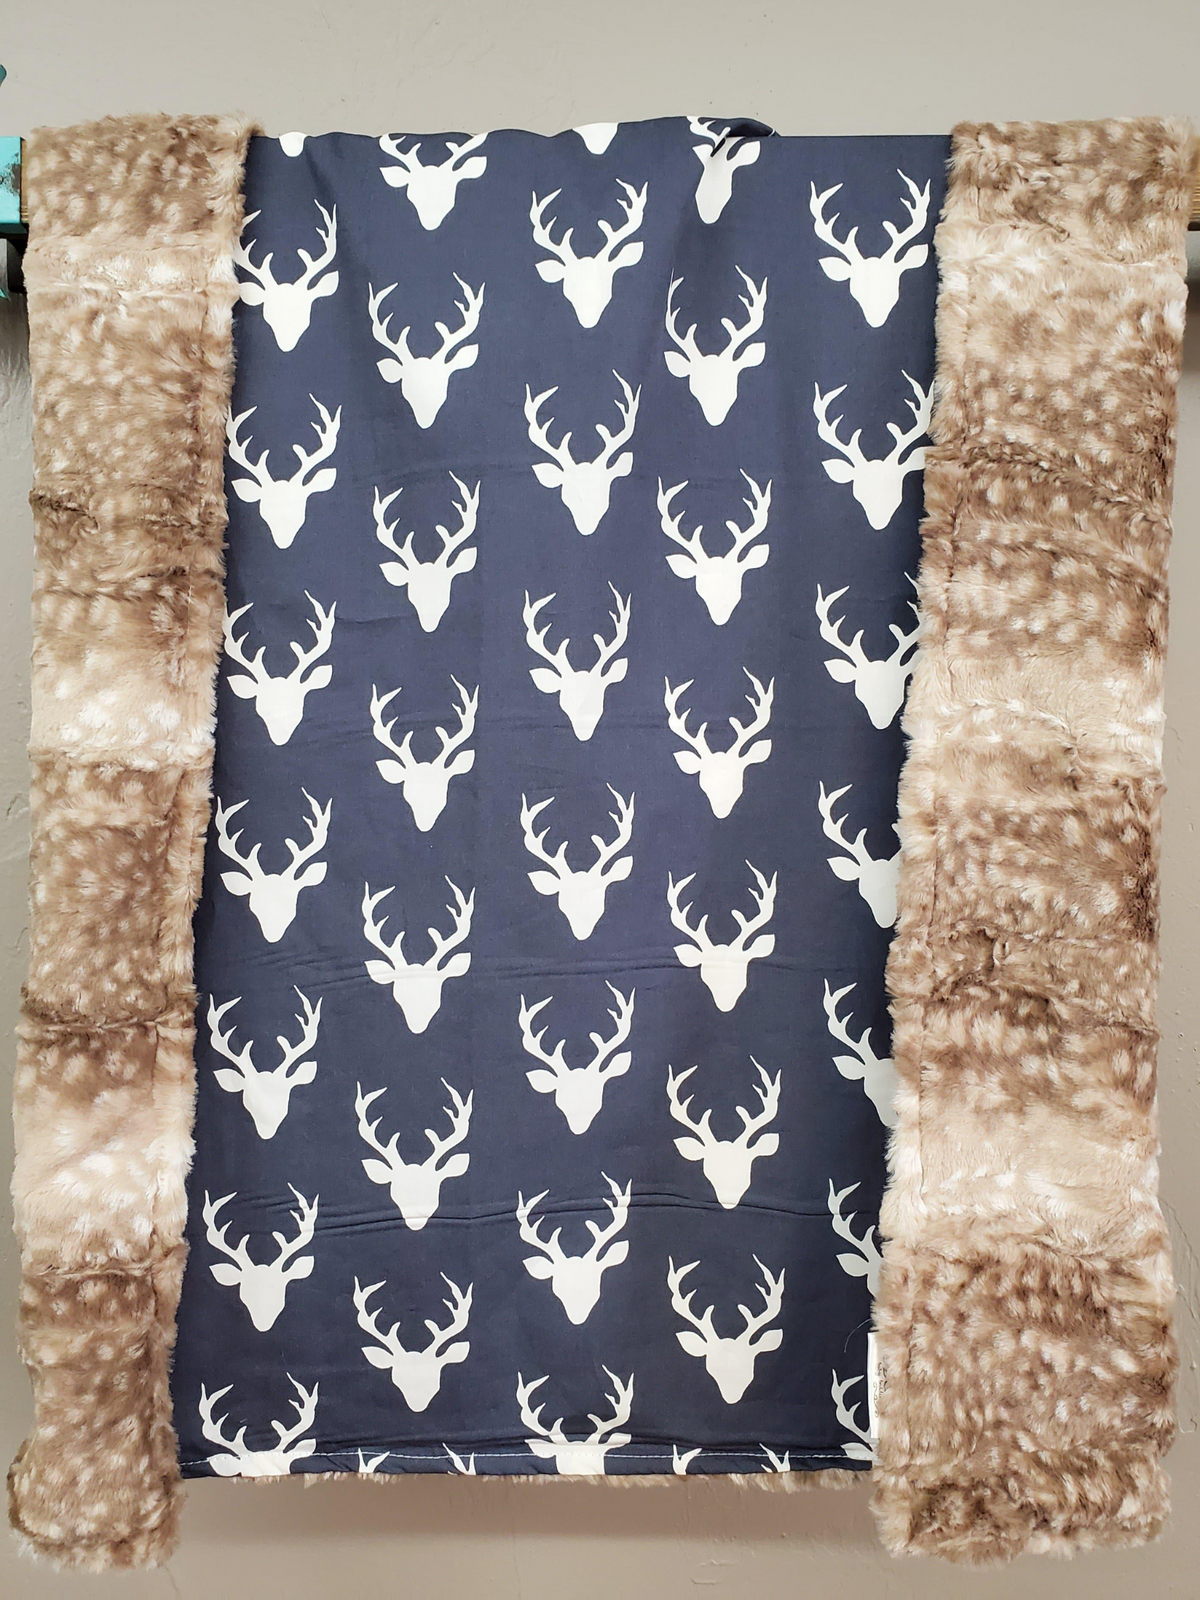 Standard Blanket - Navy Buck and Fawn Minky Woodland Blanket - DBC Baby Bedding Co 